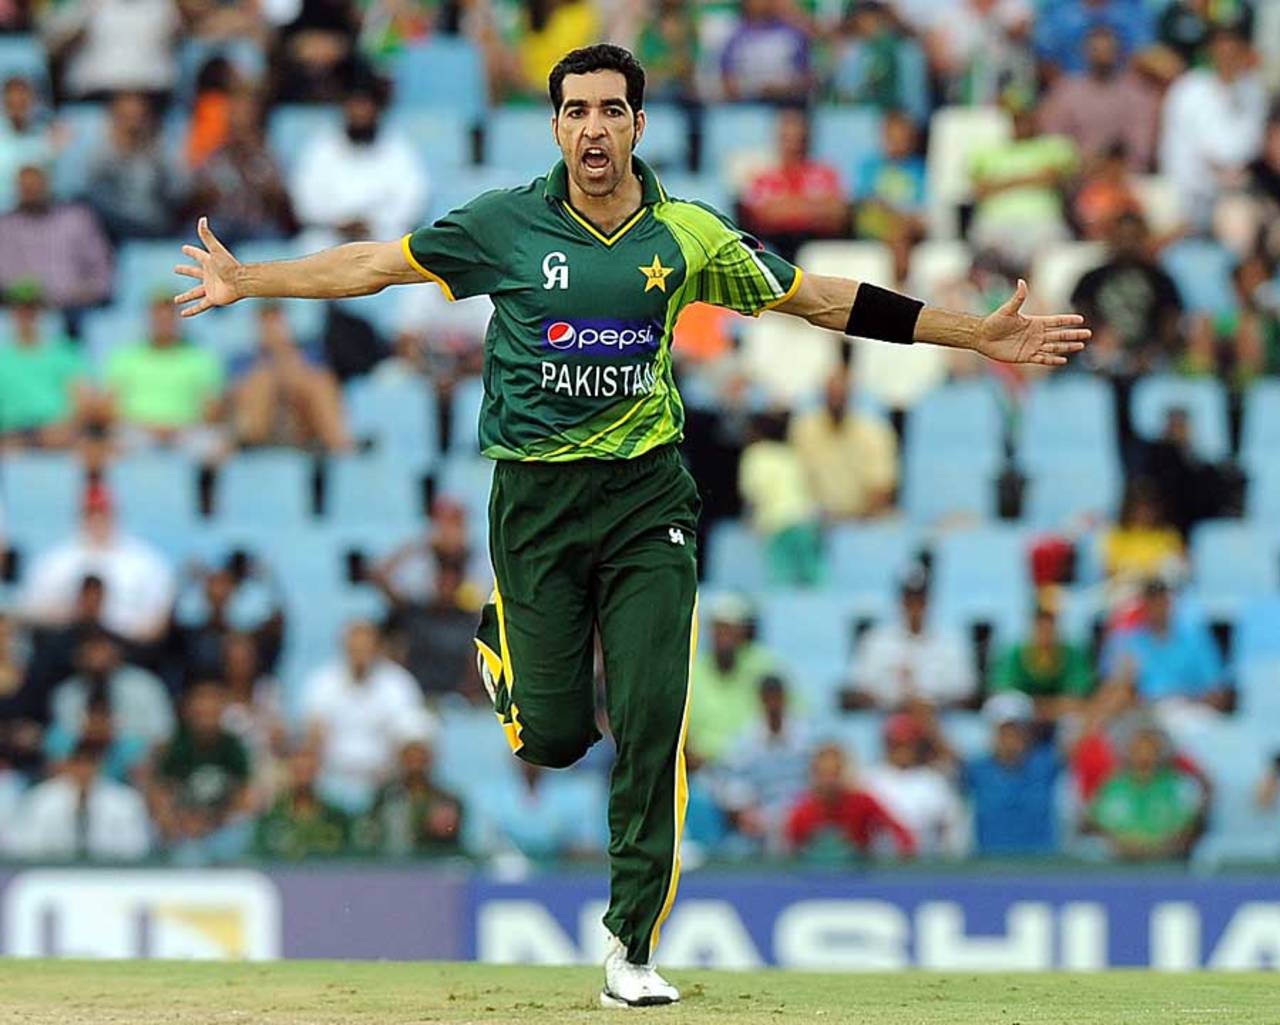 Umar Gul has not been able to effectively transfer his devastating limited-overs ability to Test cricket&nbsp;&nbsp;&bull;&nbsp;&nbsp;AFP